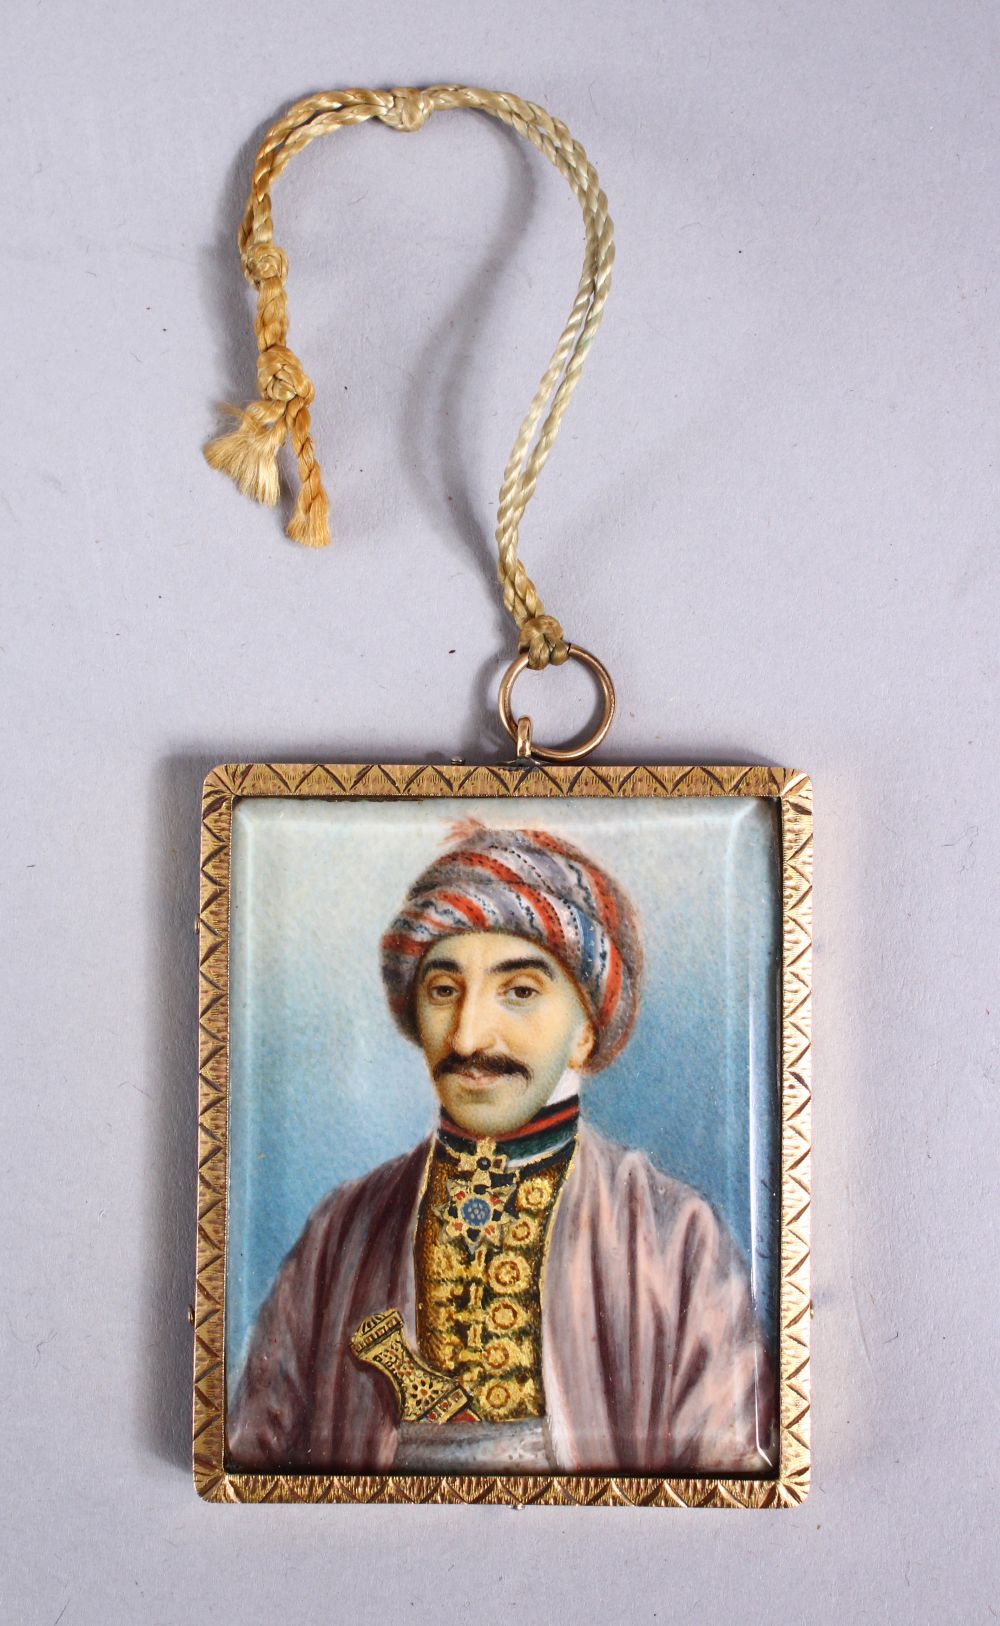 A 19TH CENTURY PERSIAN MINIATURE PAINTING ON MICA? WITH GILT METAL FRAME - SIGNED, possibly gold but